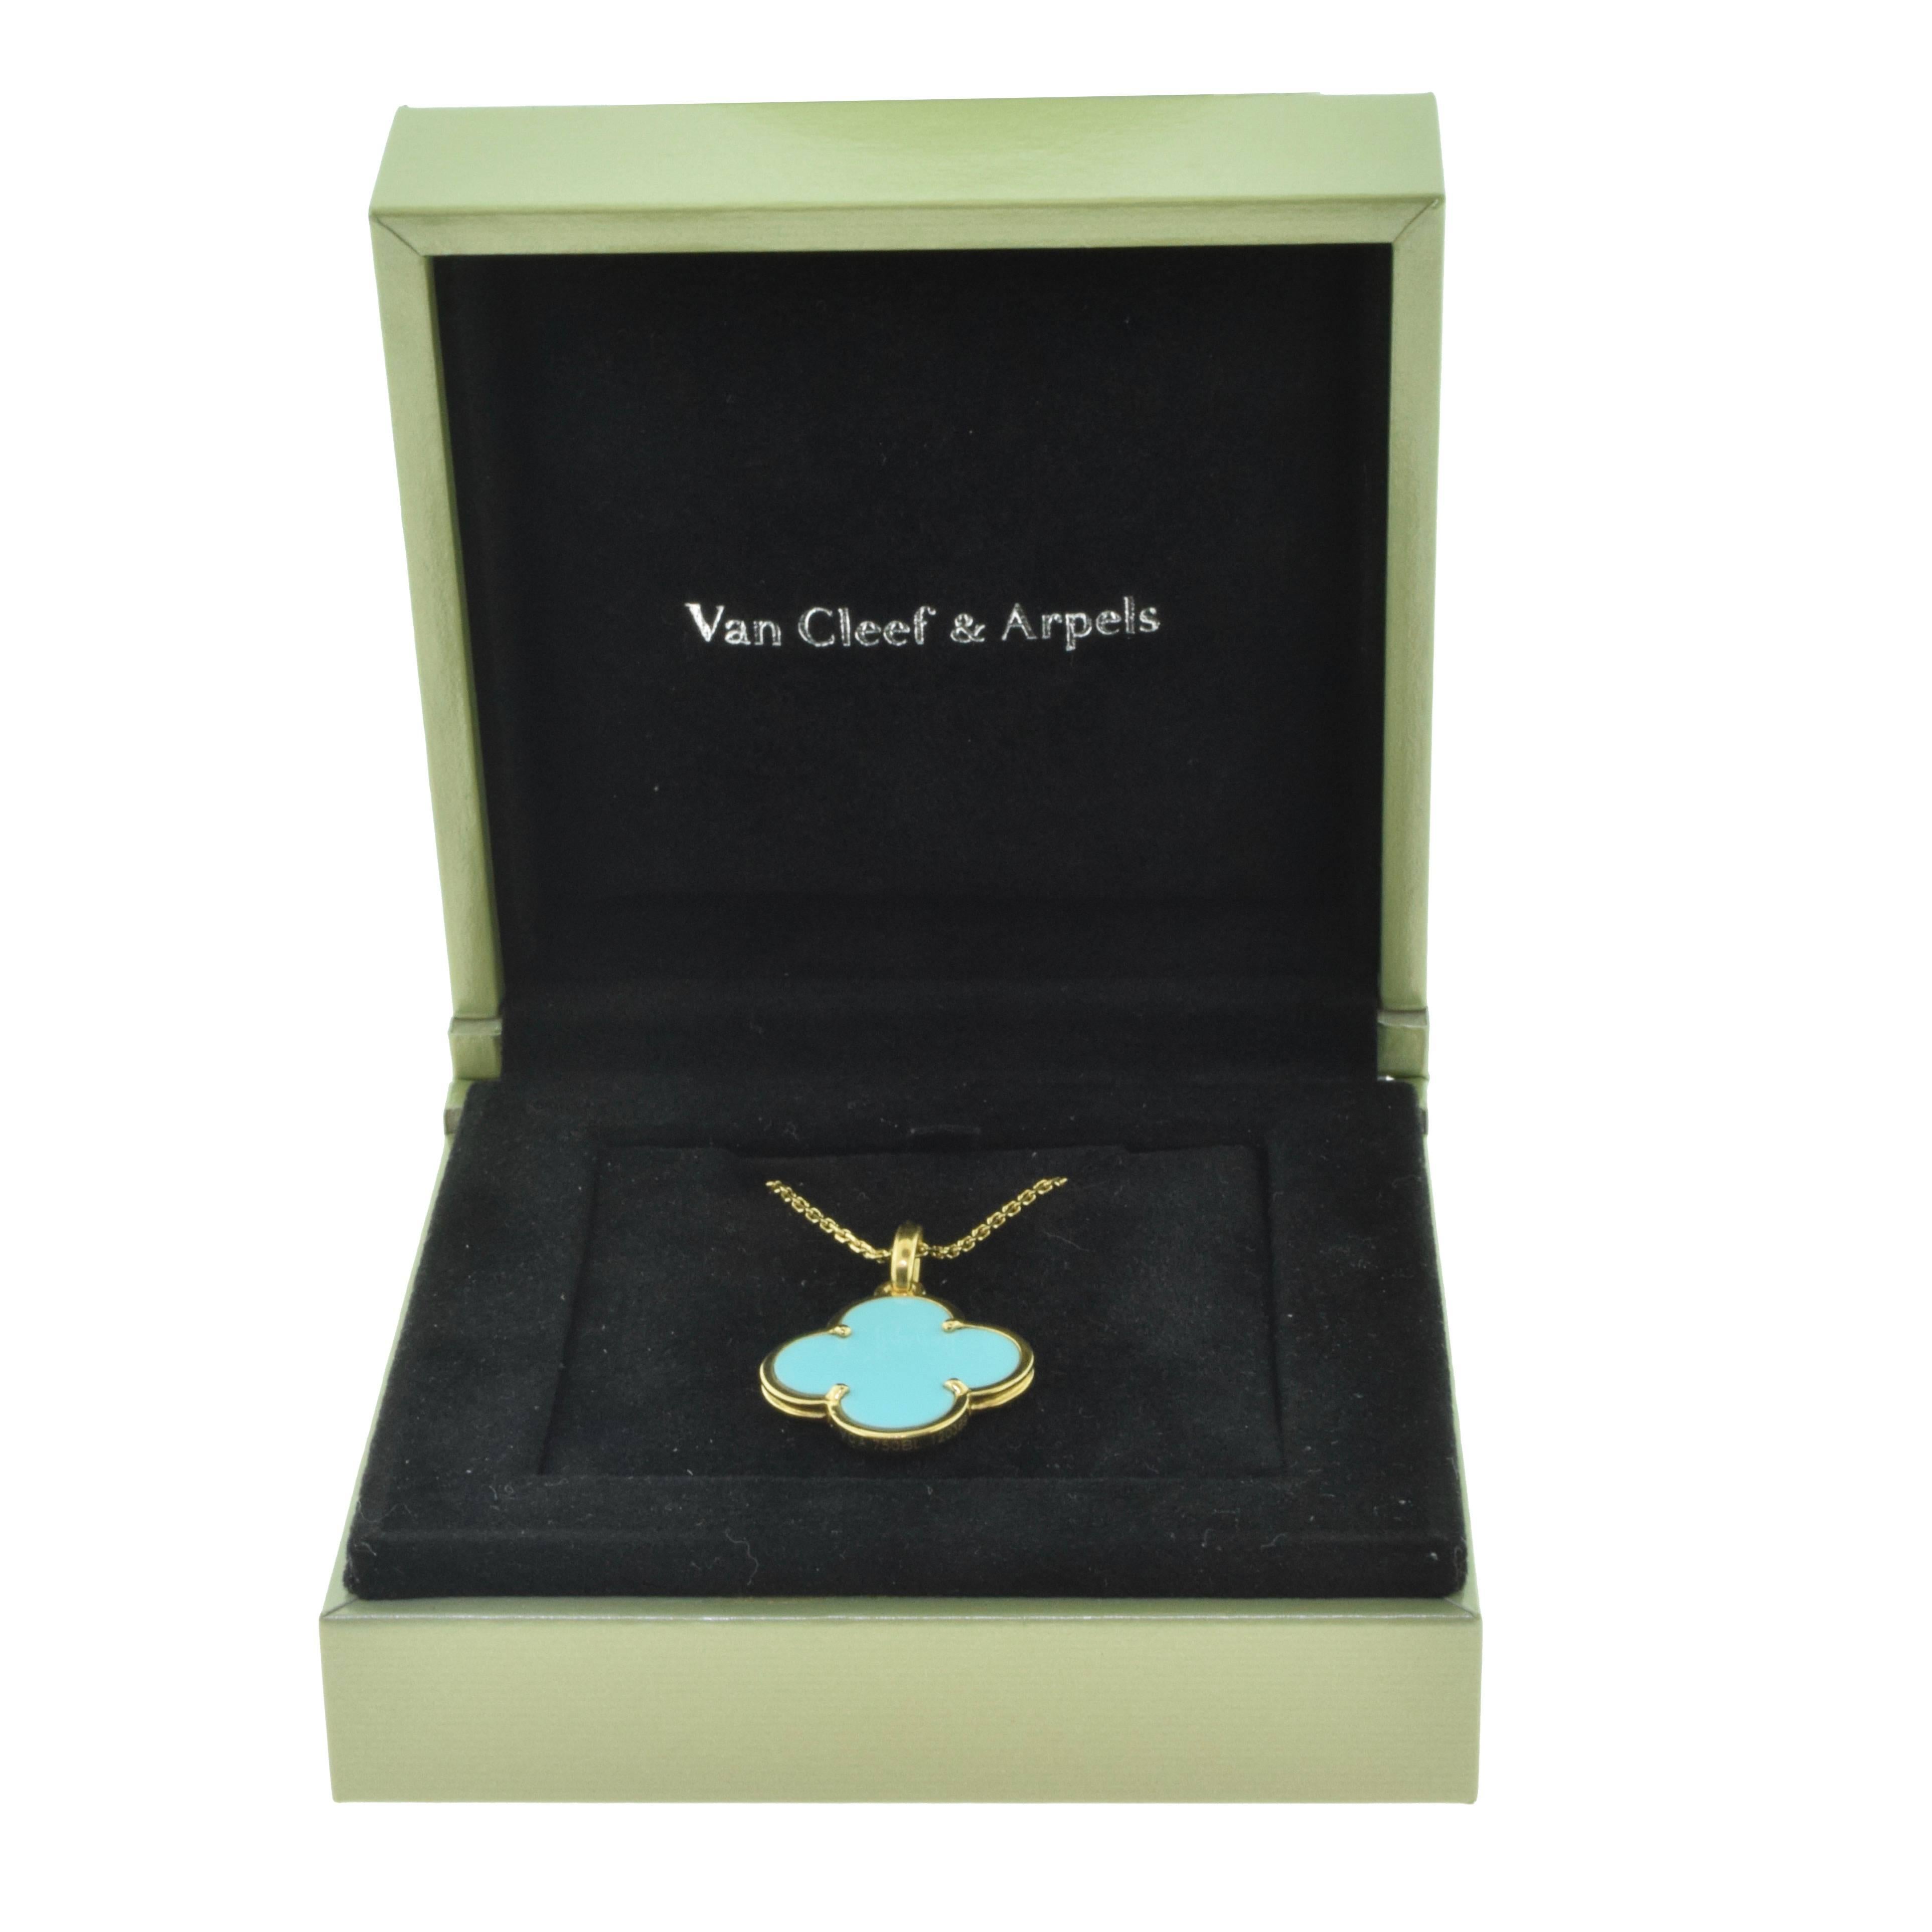 Designer: Van Cleef & Arpels
Collection: Magic Alhambra
Metal: 18 Karat Yellow Gold
Stone: Turquoise
Chain Length: 14.5 inches, 16 inches (adjustable)
Total Item Weight (g): 7.1
Motif Dimensions: 22.09 x 14.03 mm
Motif Thickness: 2.13 mm
Collateral: